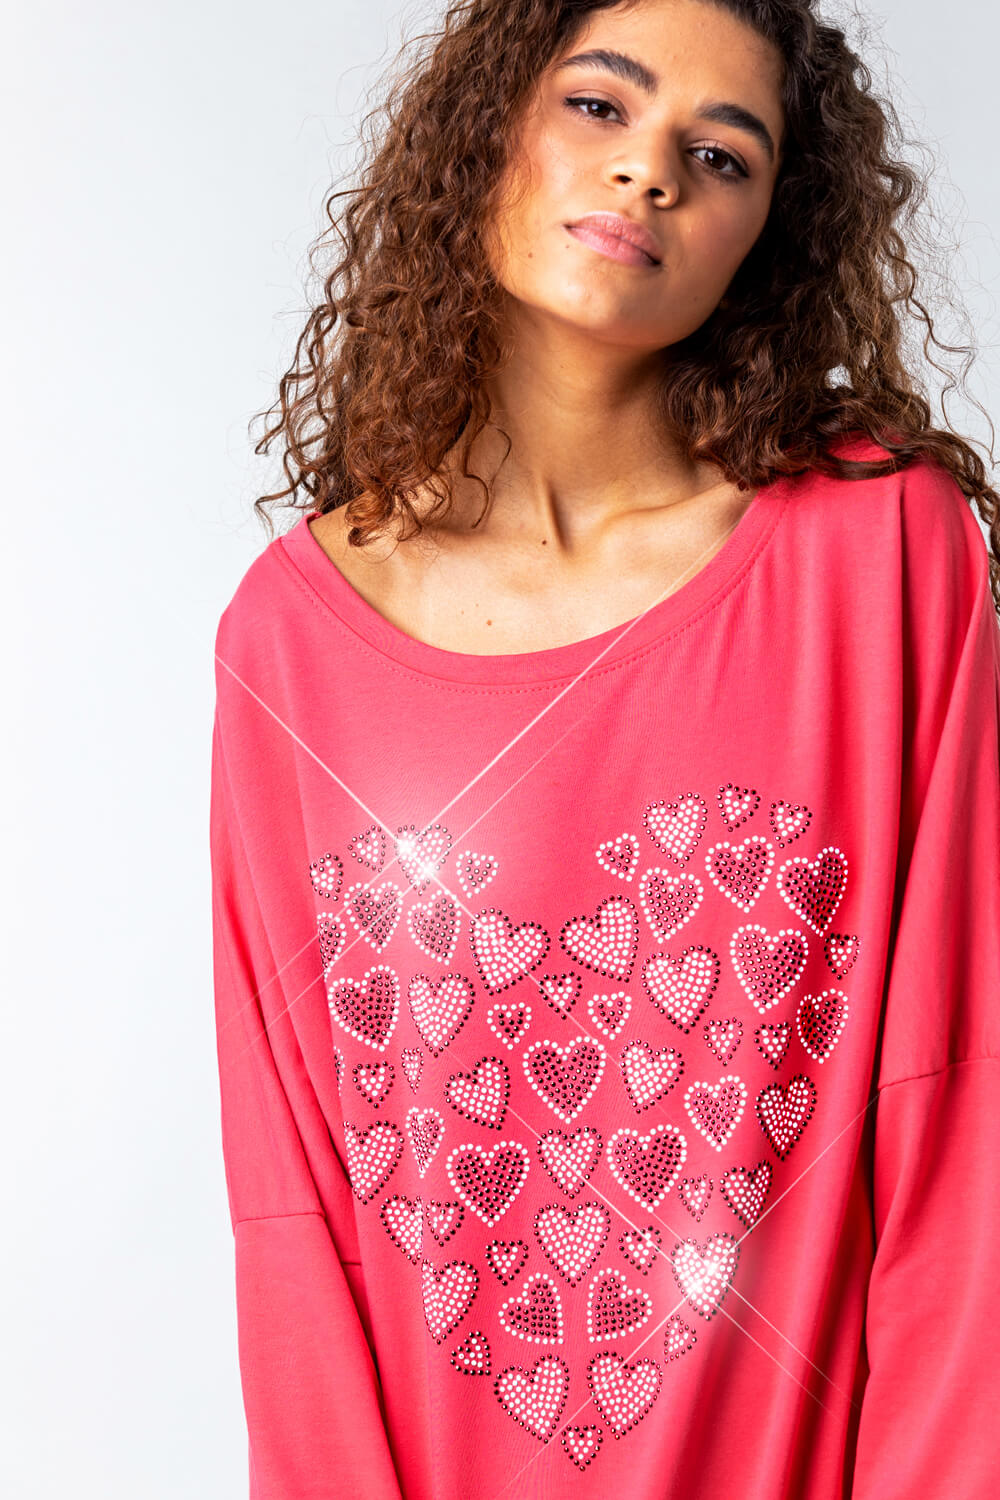 CORAL One Size Diamante Heart Print Top, Image 4 of 4